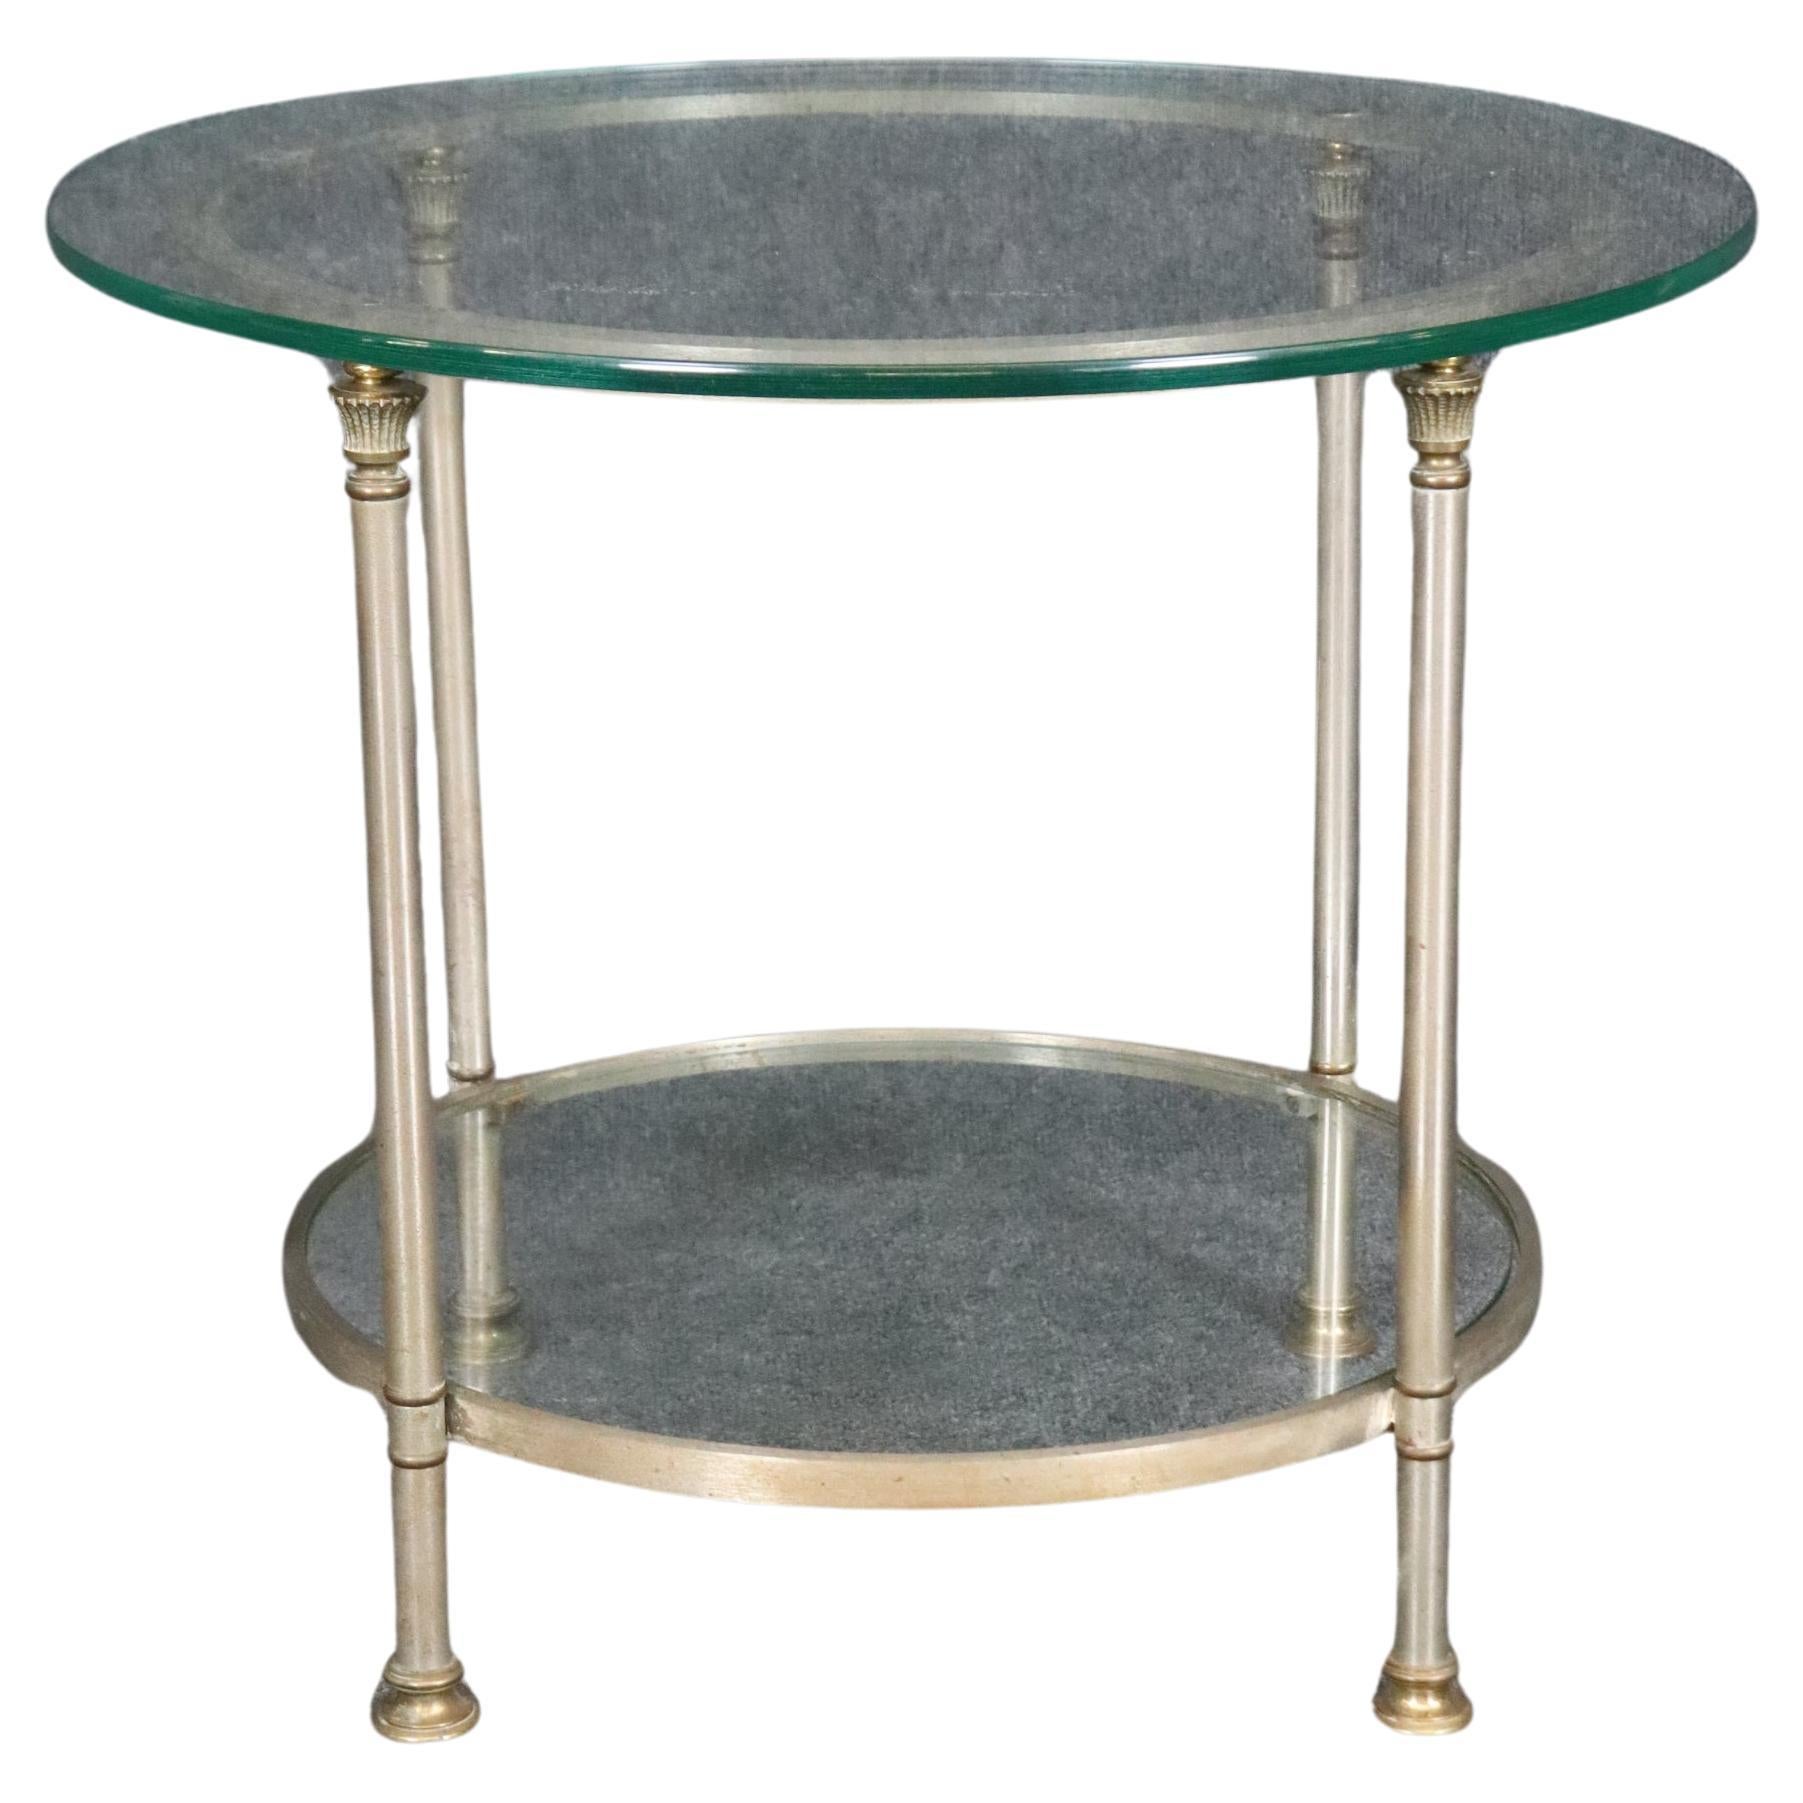 Single Steel and Glass Maison Jansen Round End Table Circa 1950s For Sale